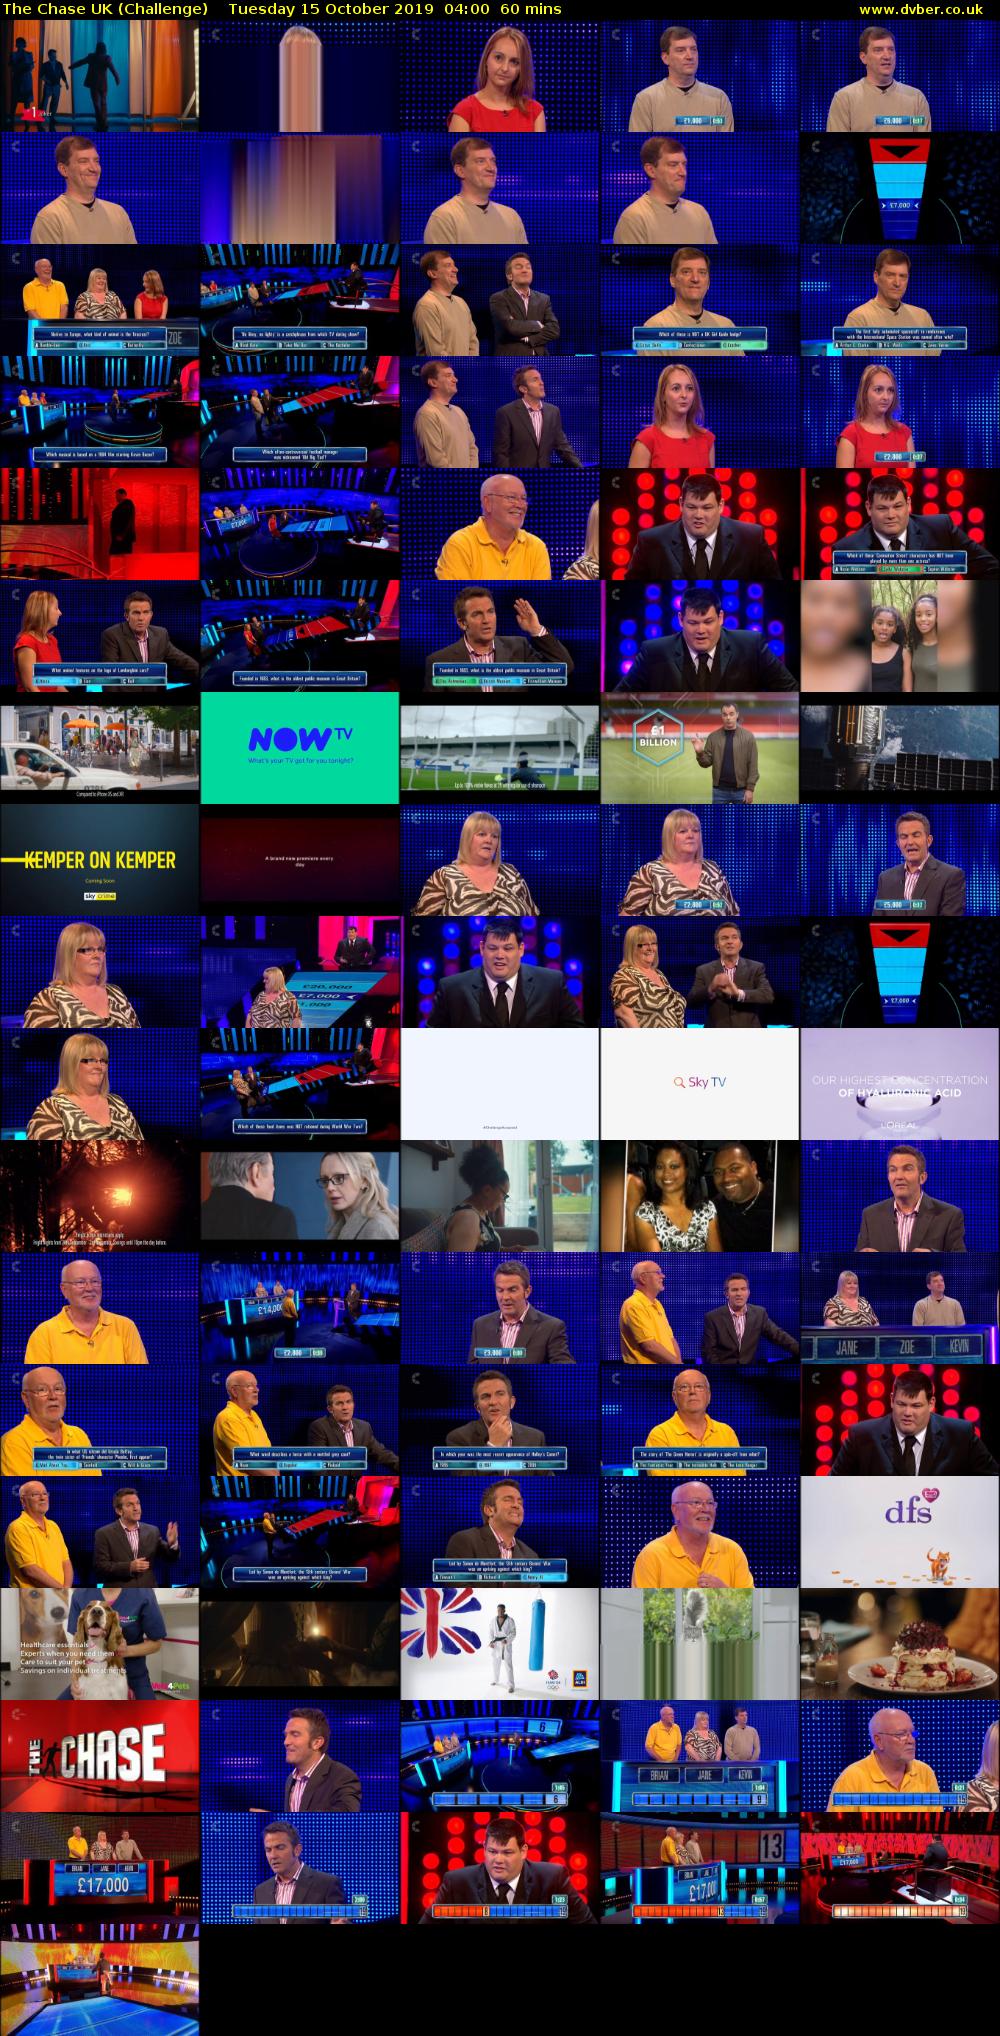 The Chase UK (Challenge) Tuesday 15 October 2019 04:00 - 05:00